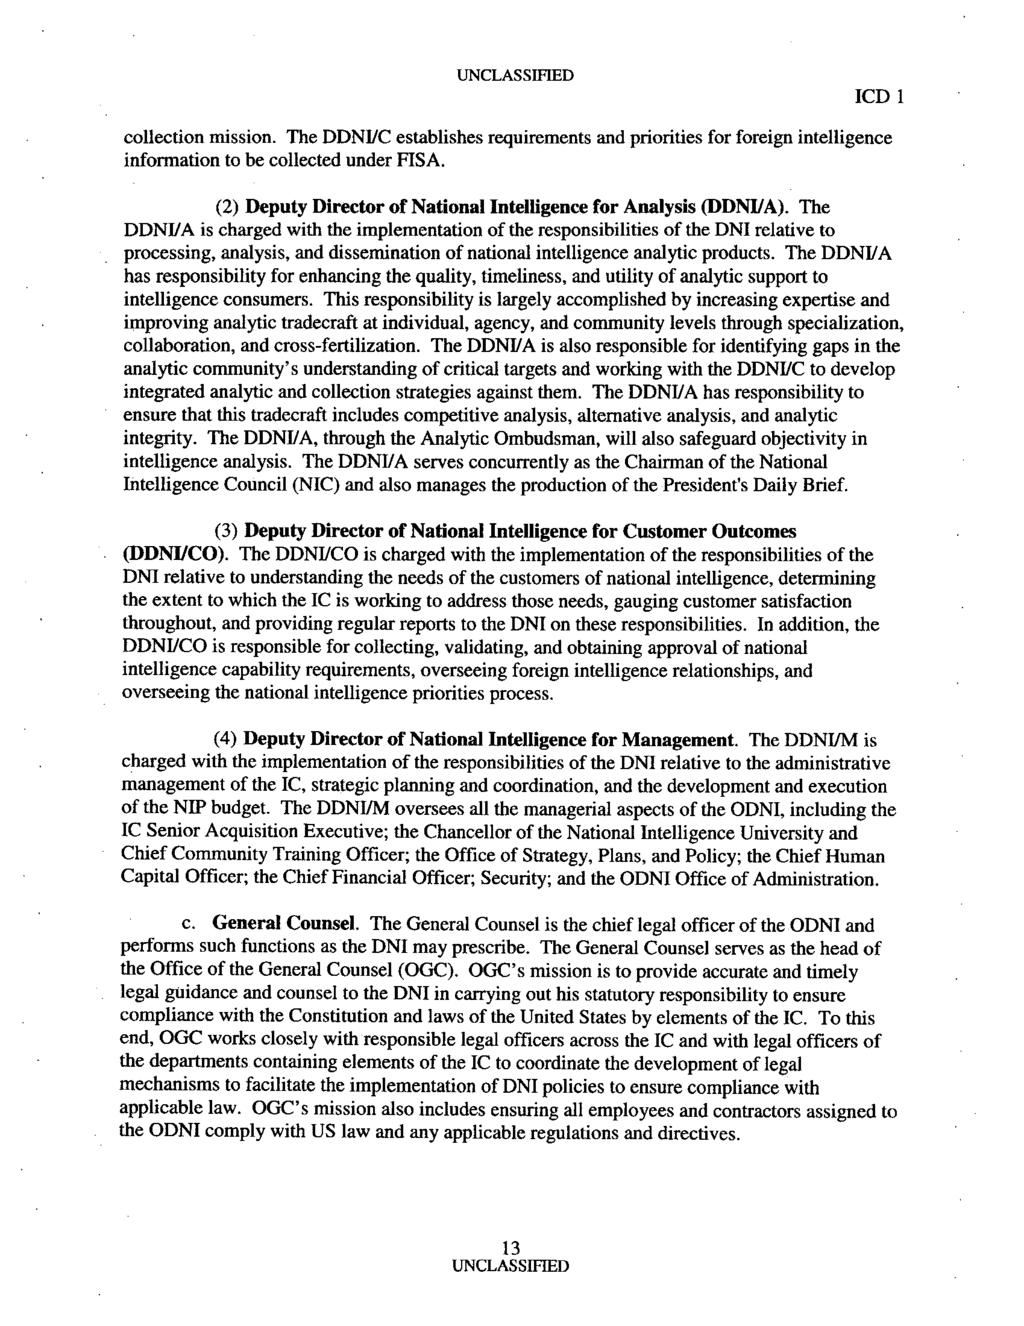 collection mission. The DDNIIC establishes requirements and priorities for foreign intelligence information to be collected under FISA.